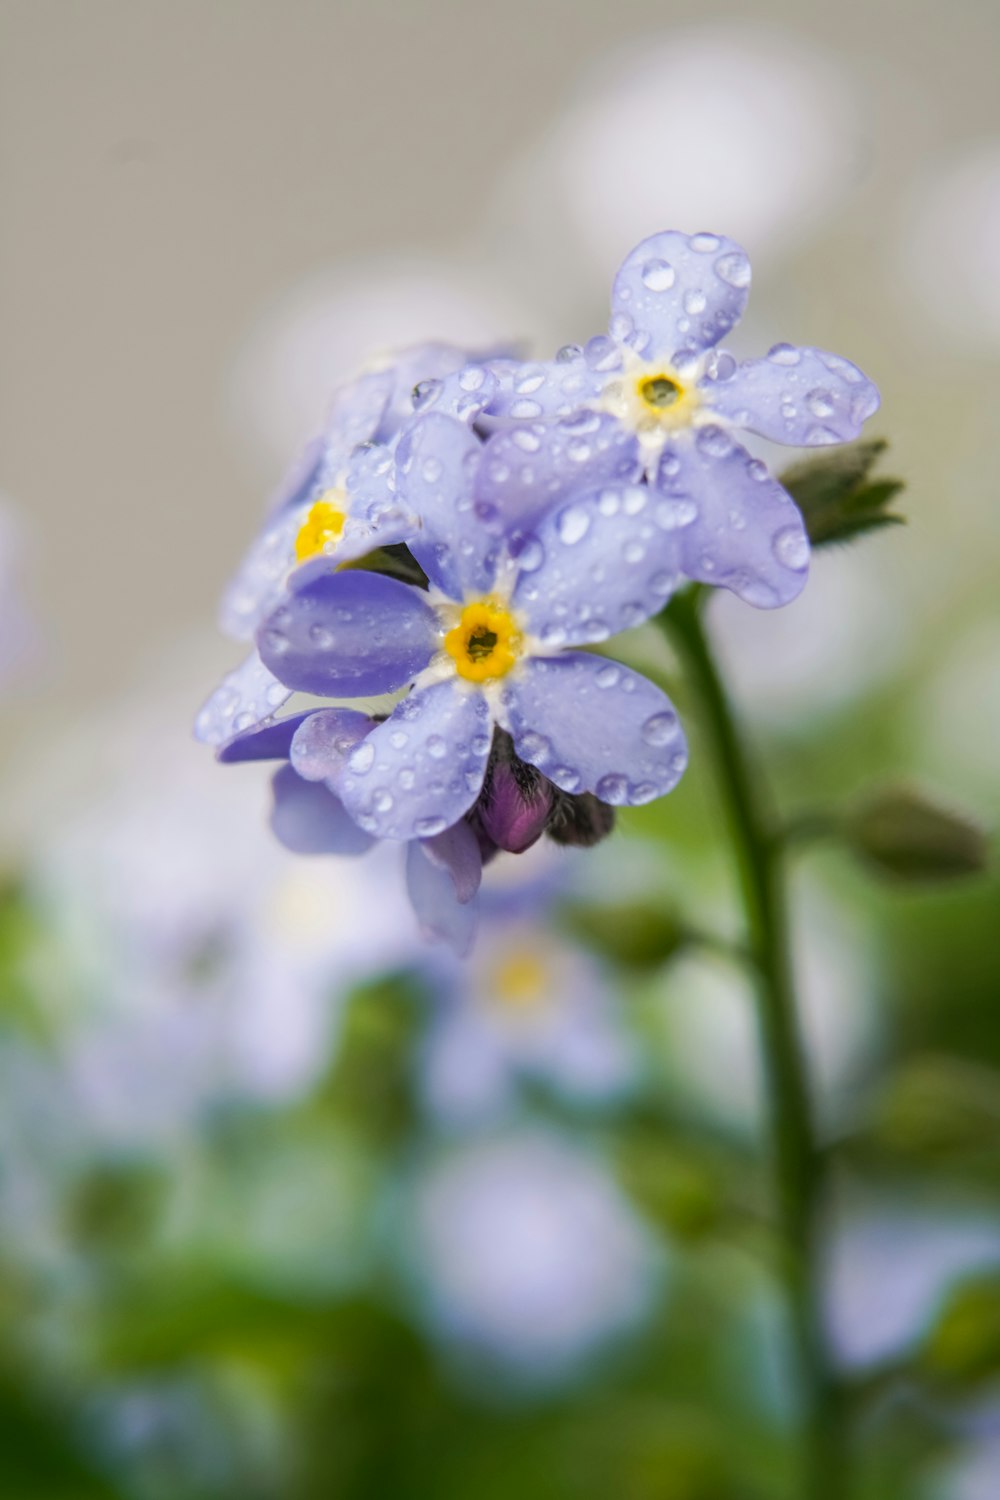 a close up of a blue flower with water droplets on it